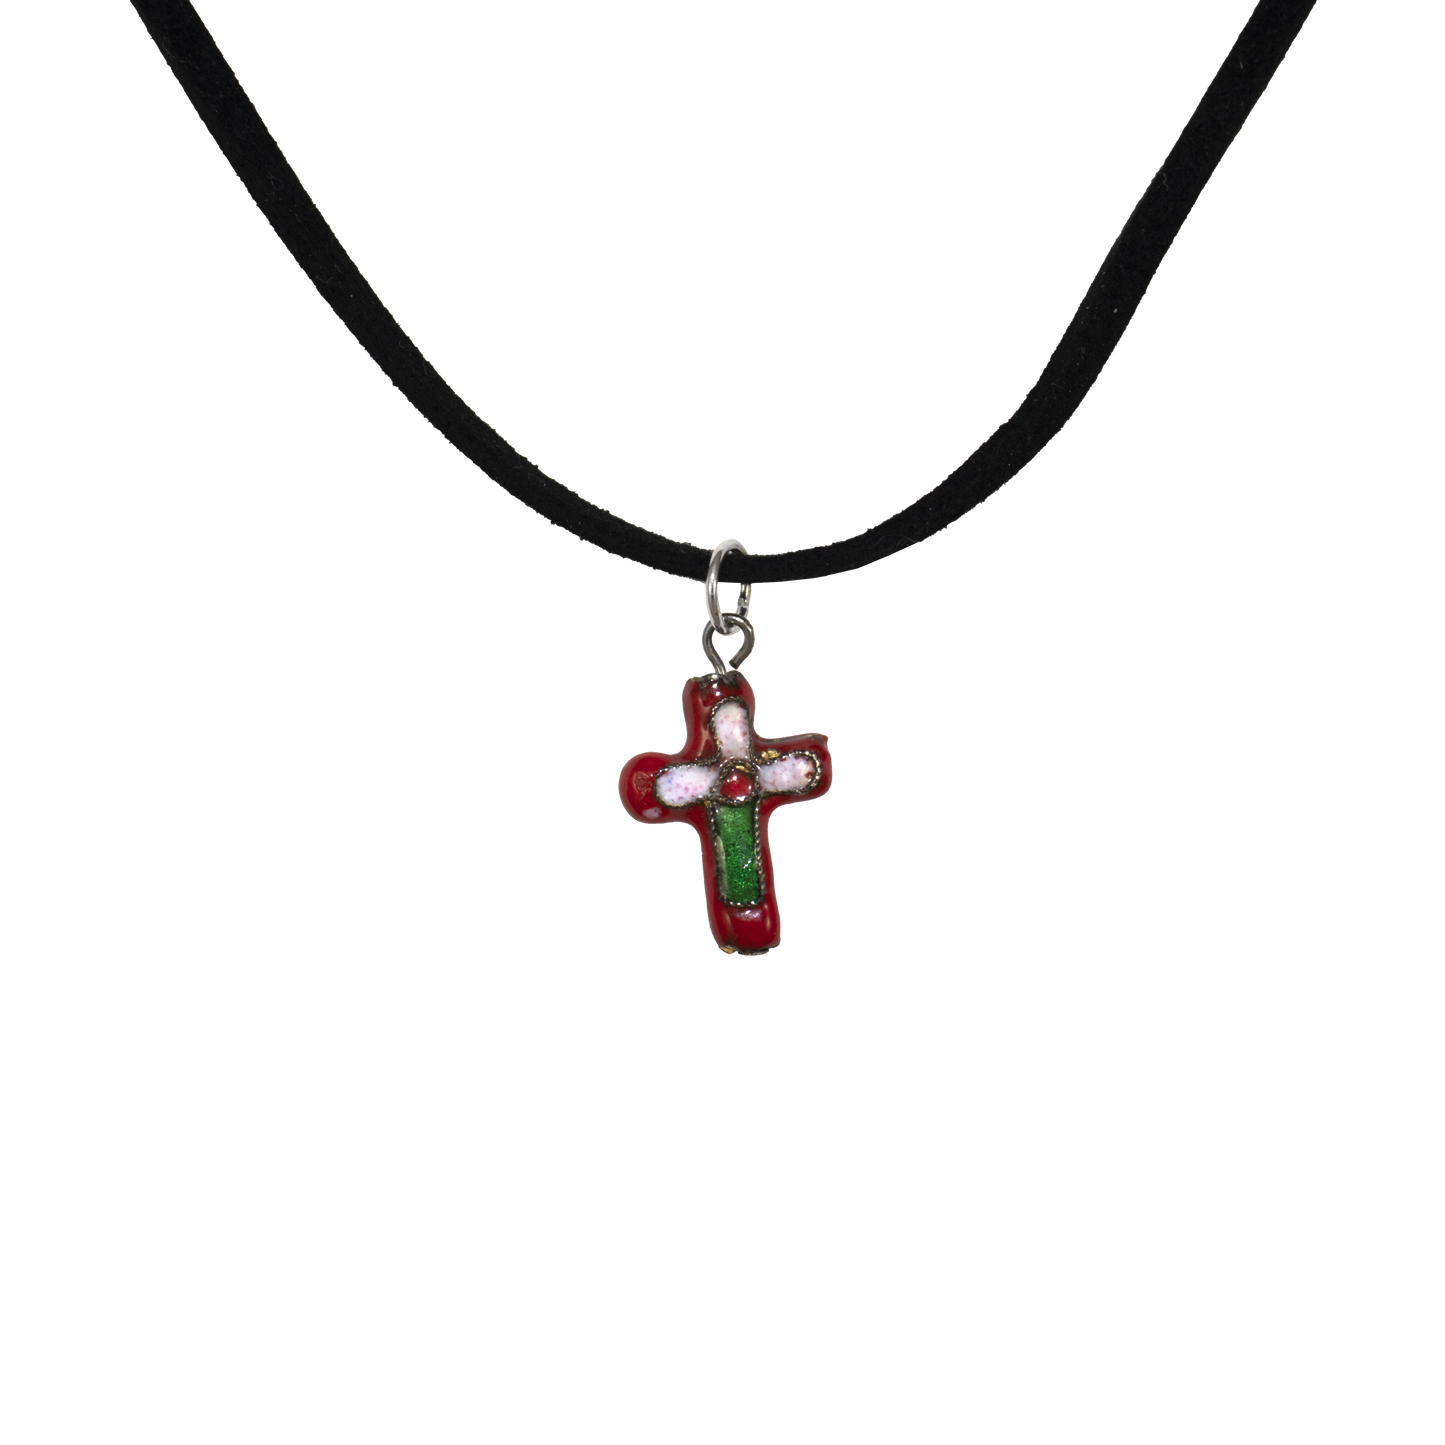 Red cross pendant with pink petal design on the top and green stem on the bottom and red center on a suede cord